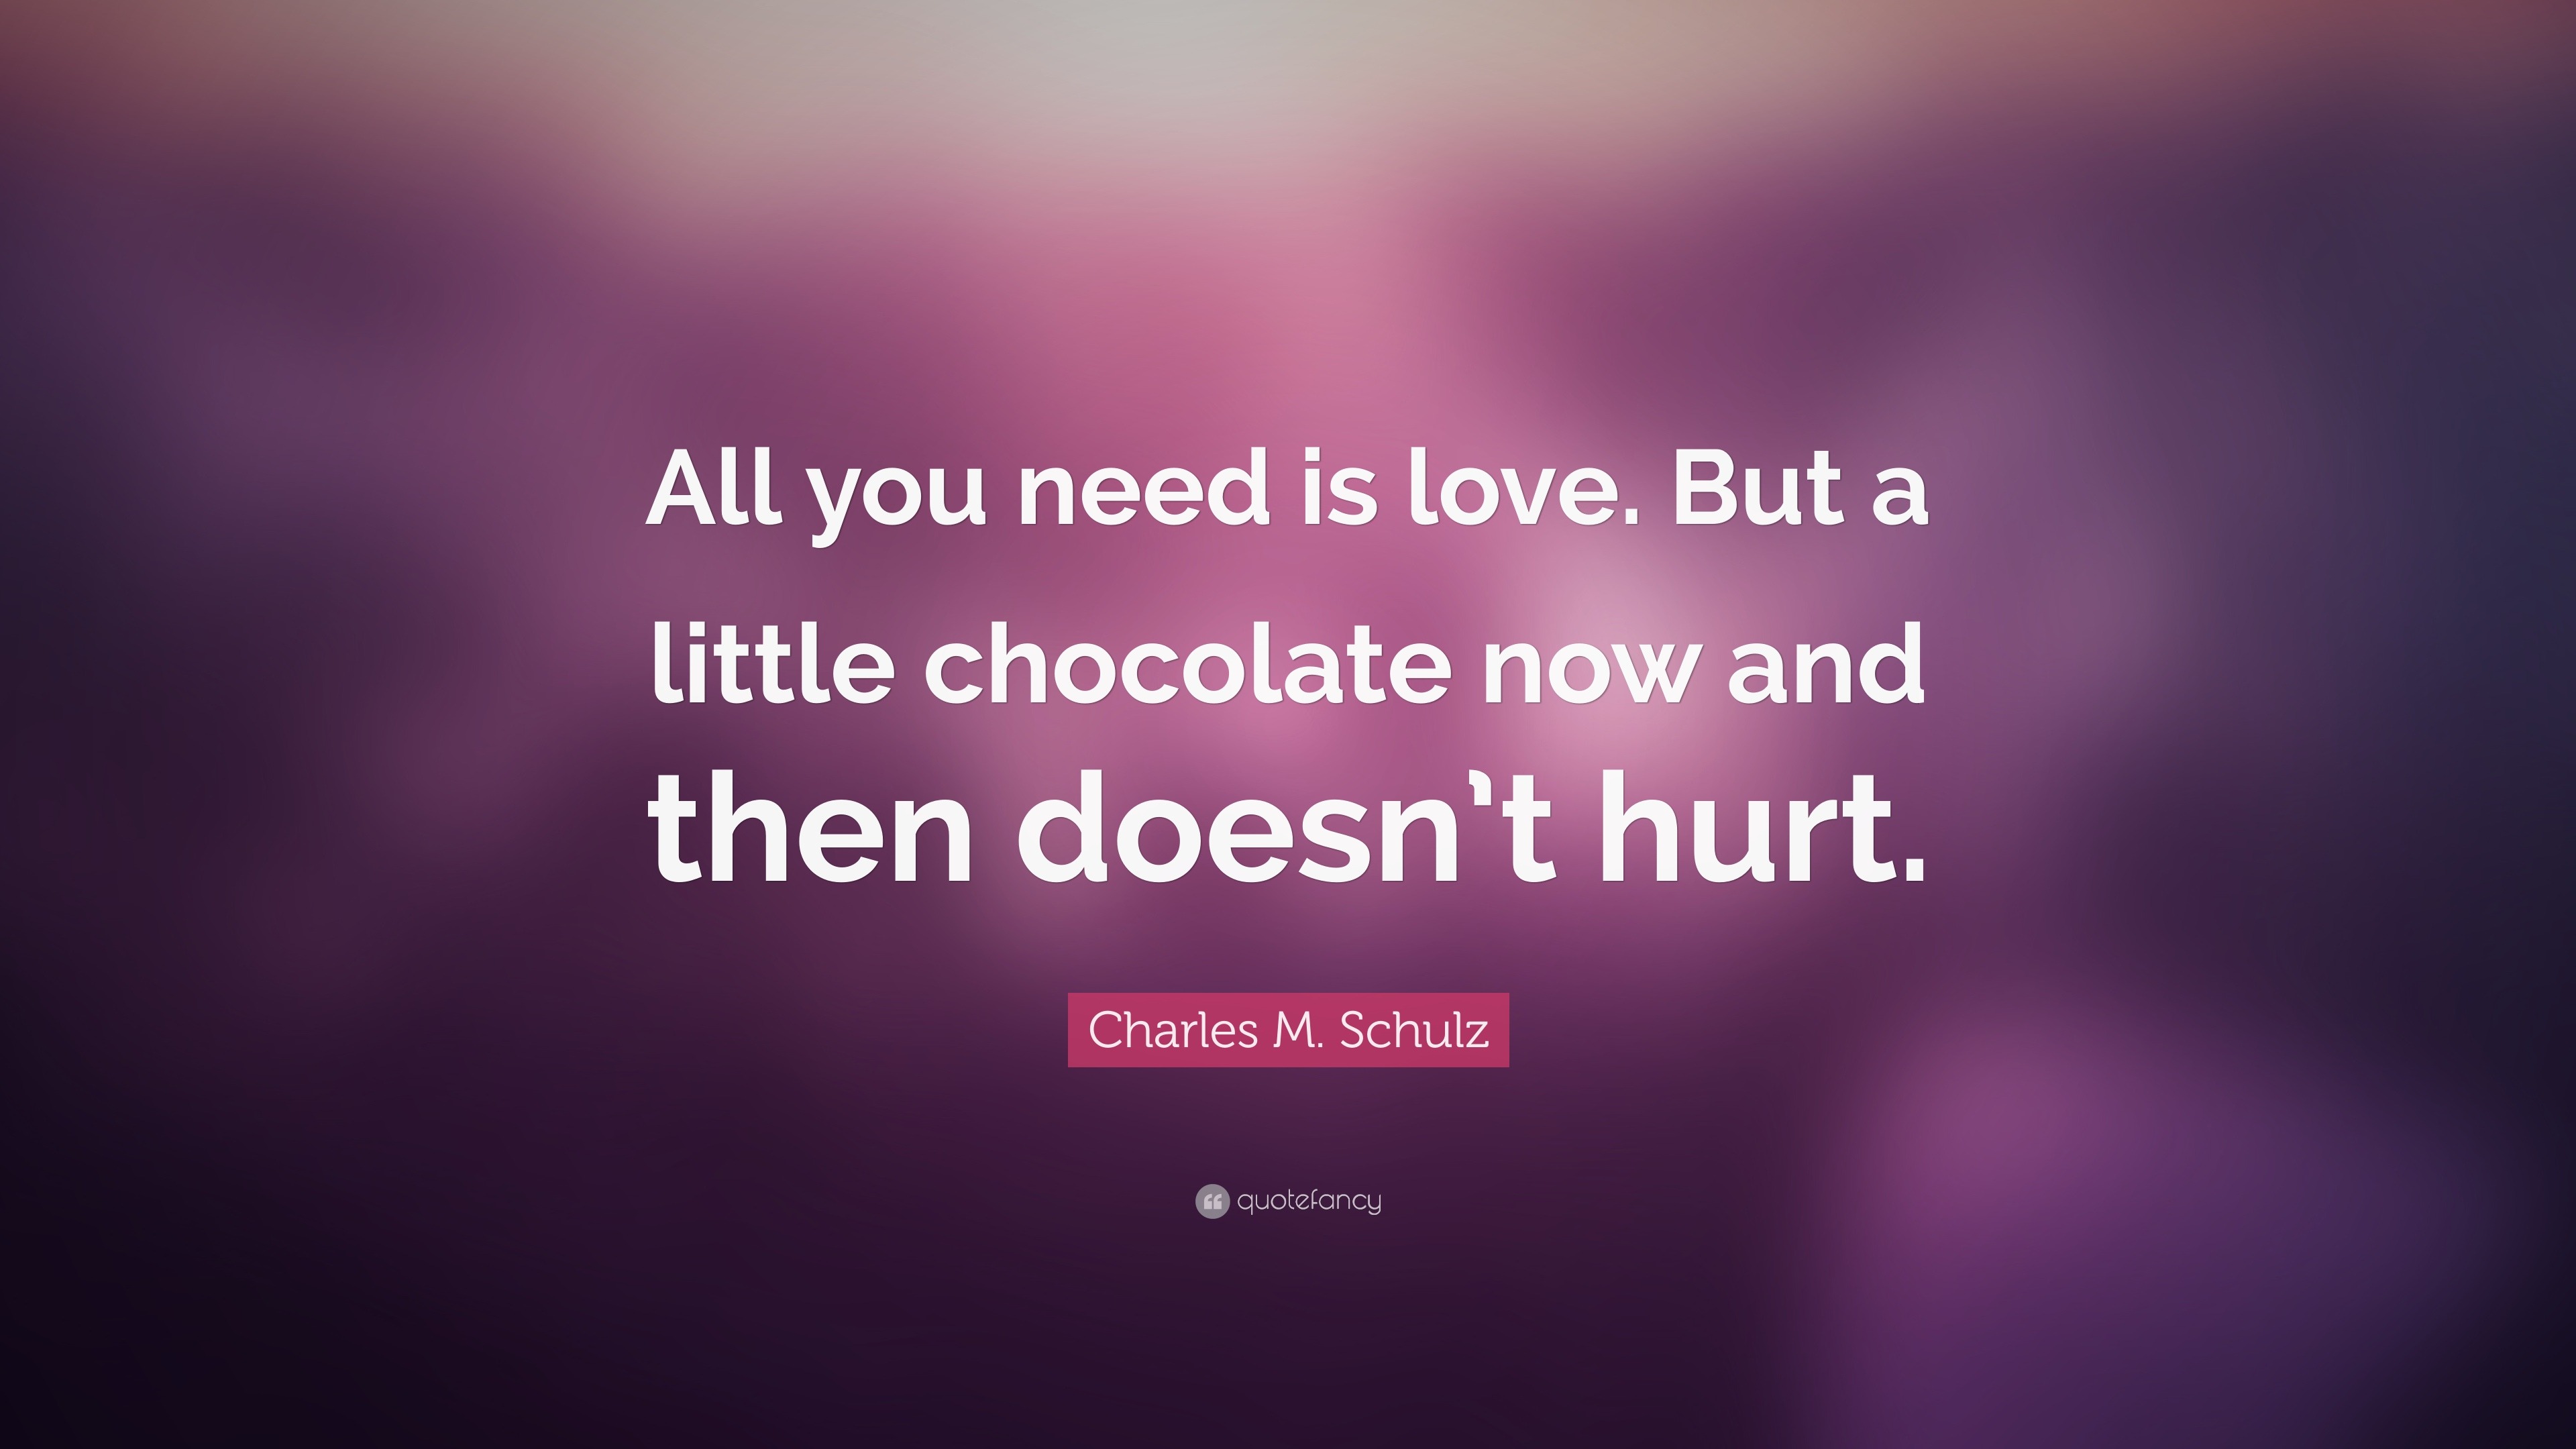 Charles M Schulz Quote “All you need is love But a little